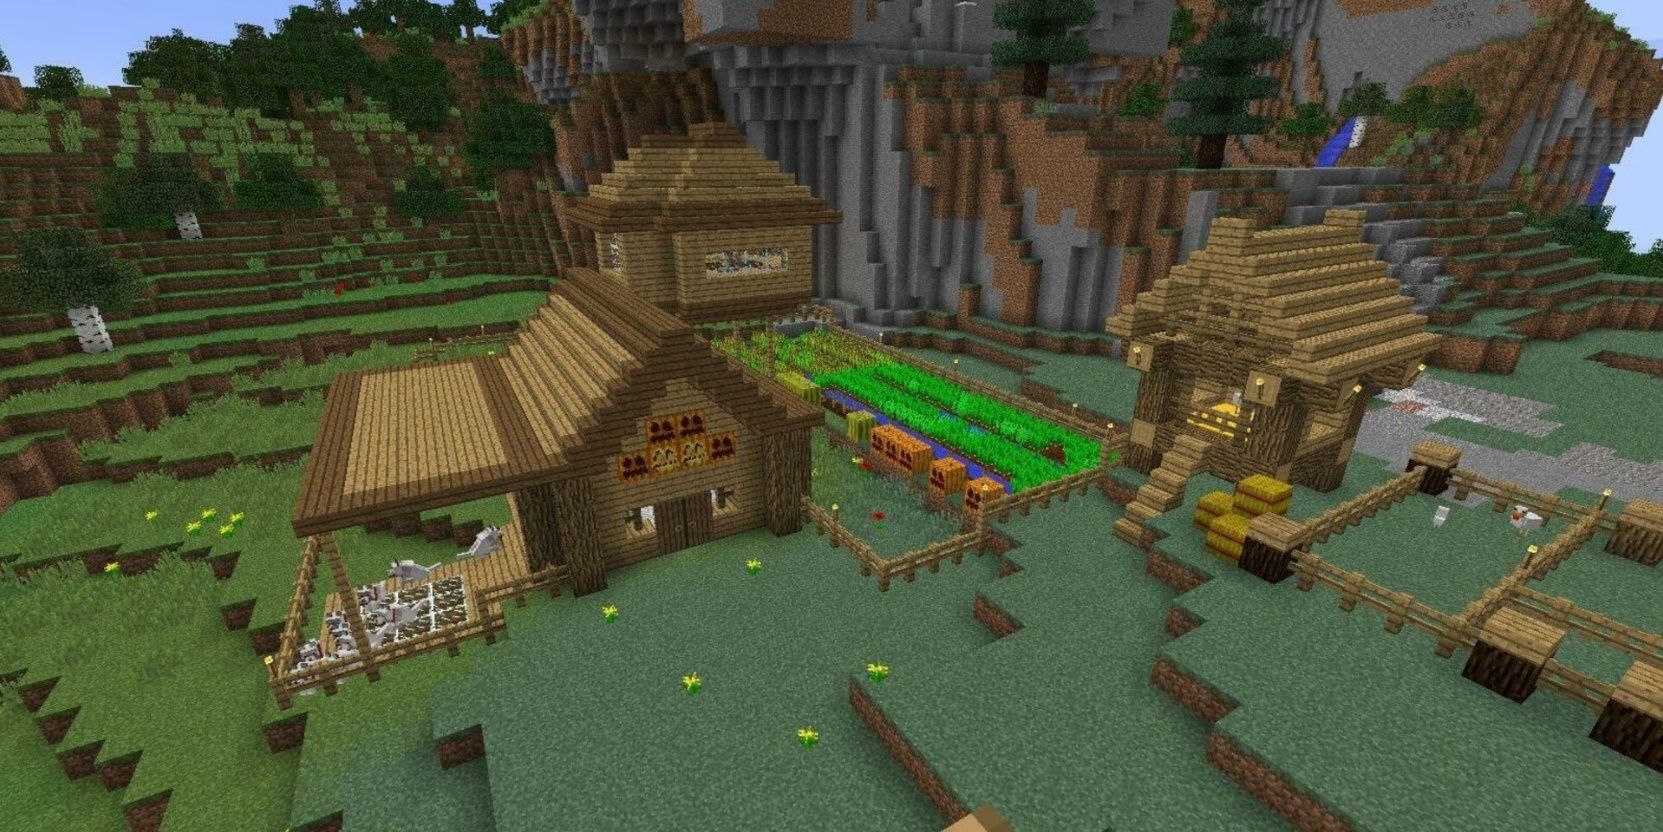 A few houses and farms in Minecraft